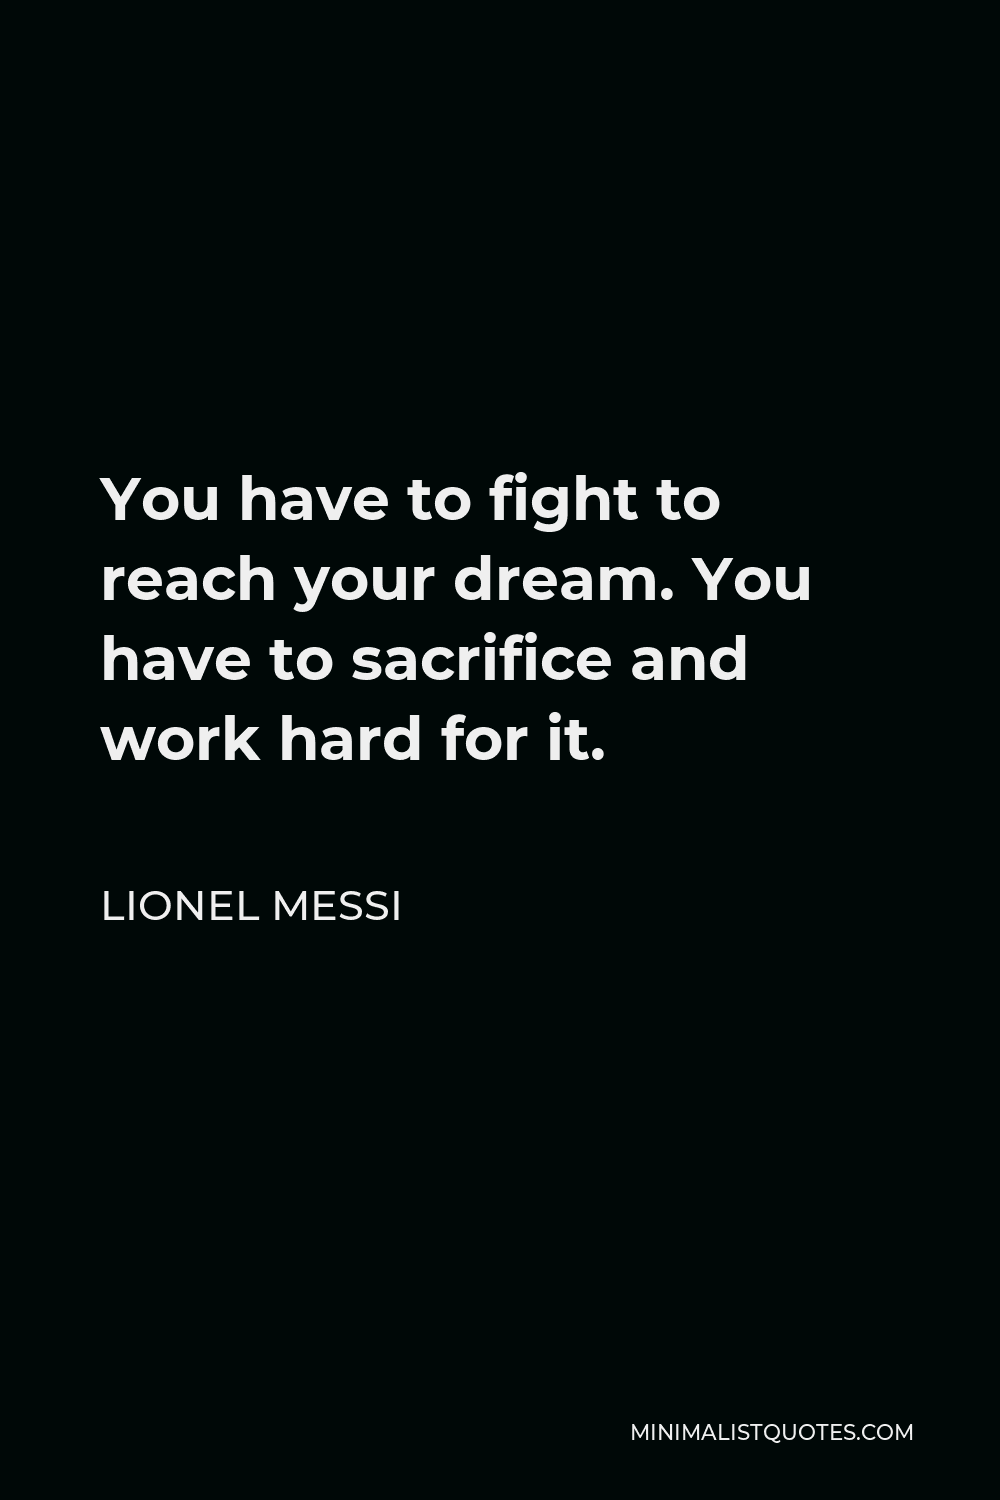 Lionel Messi Quote - You have to fight to reach your dream. You have to sacrifice and work hard for it.